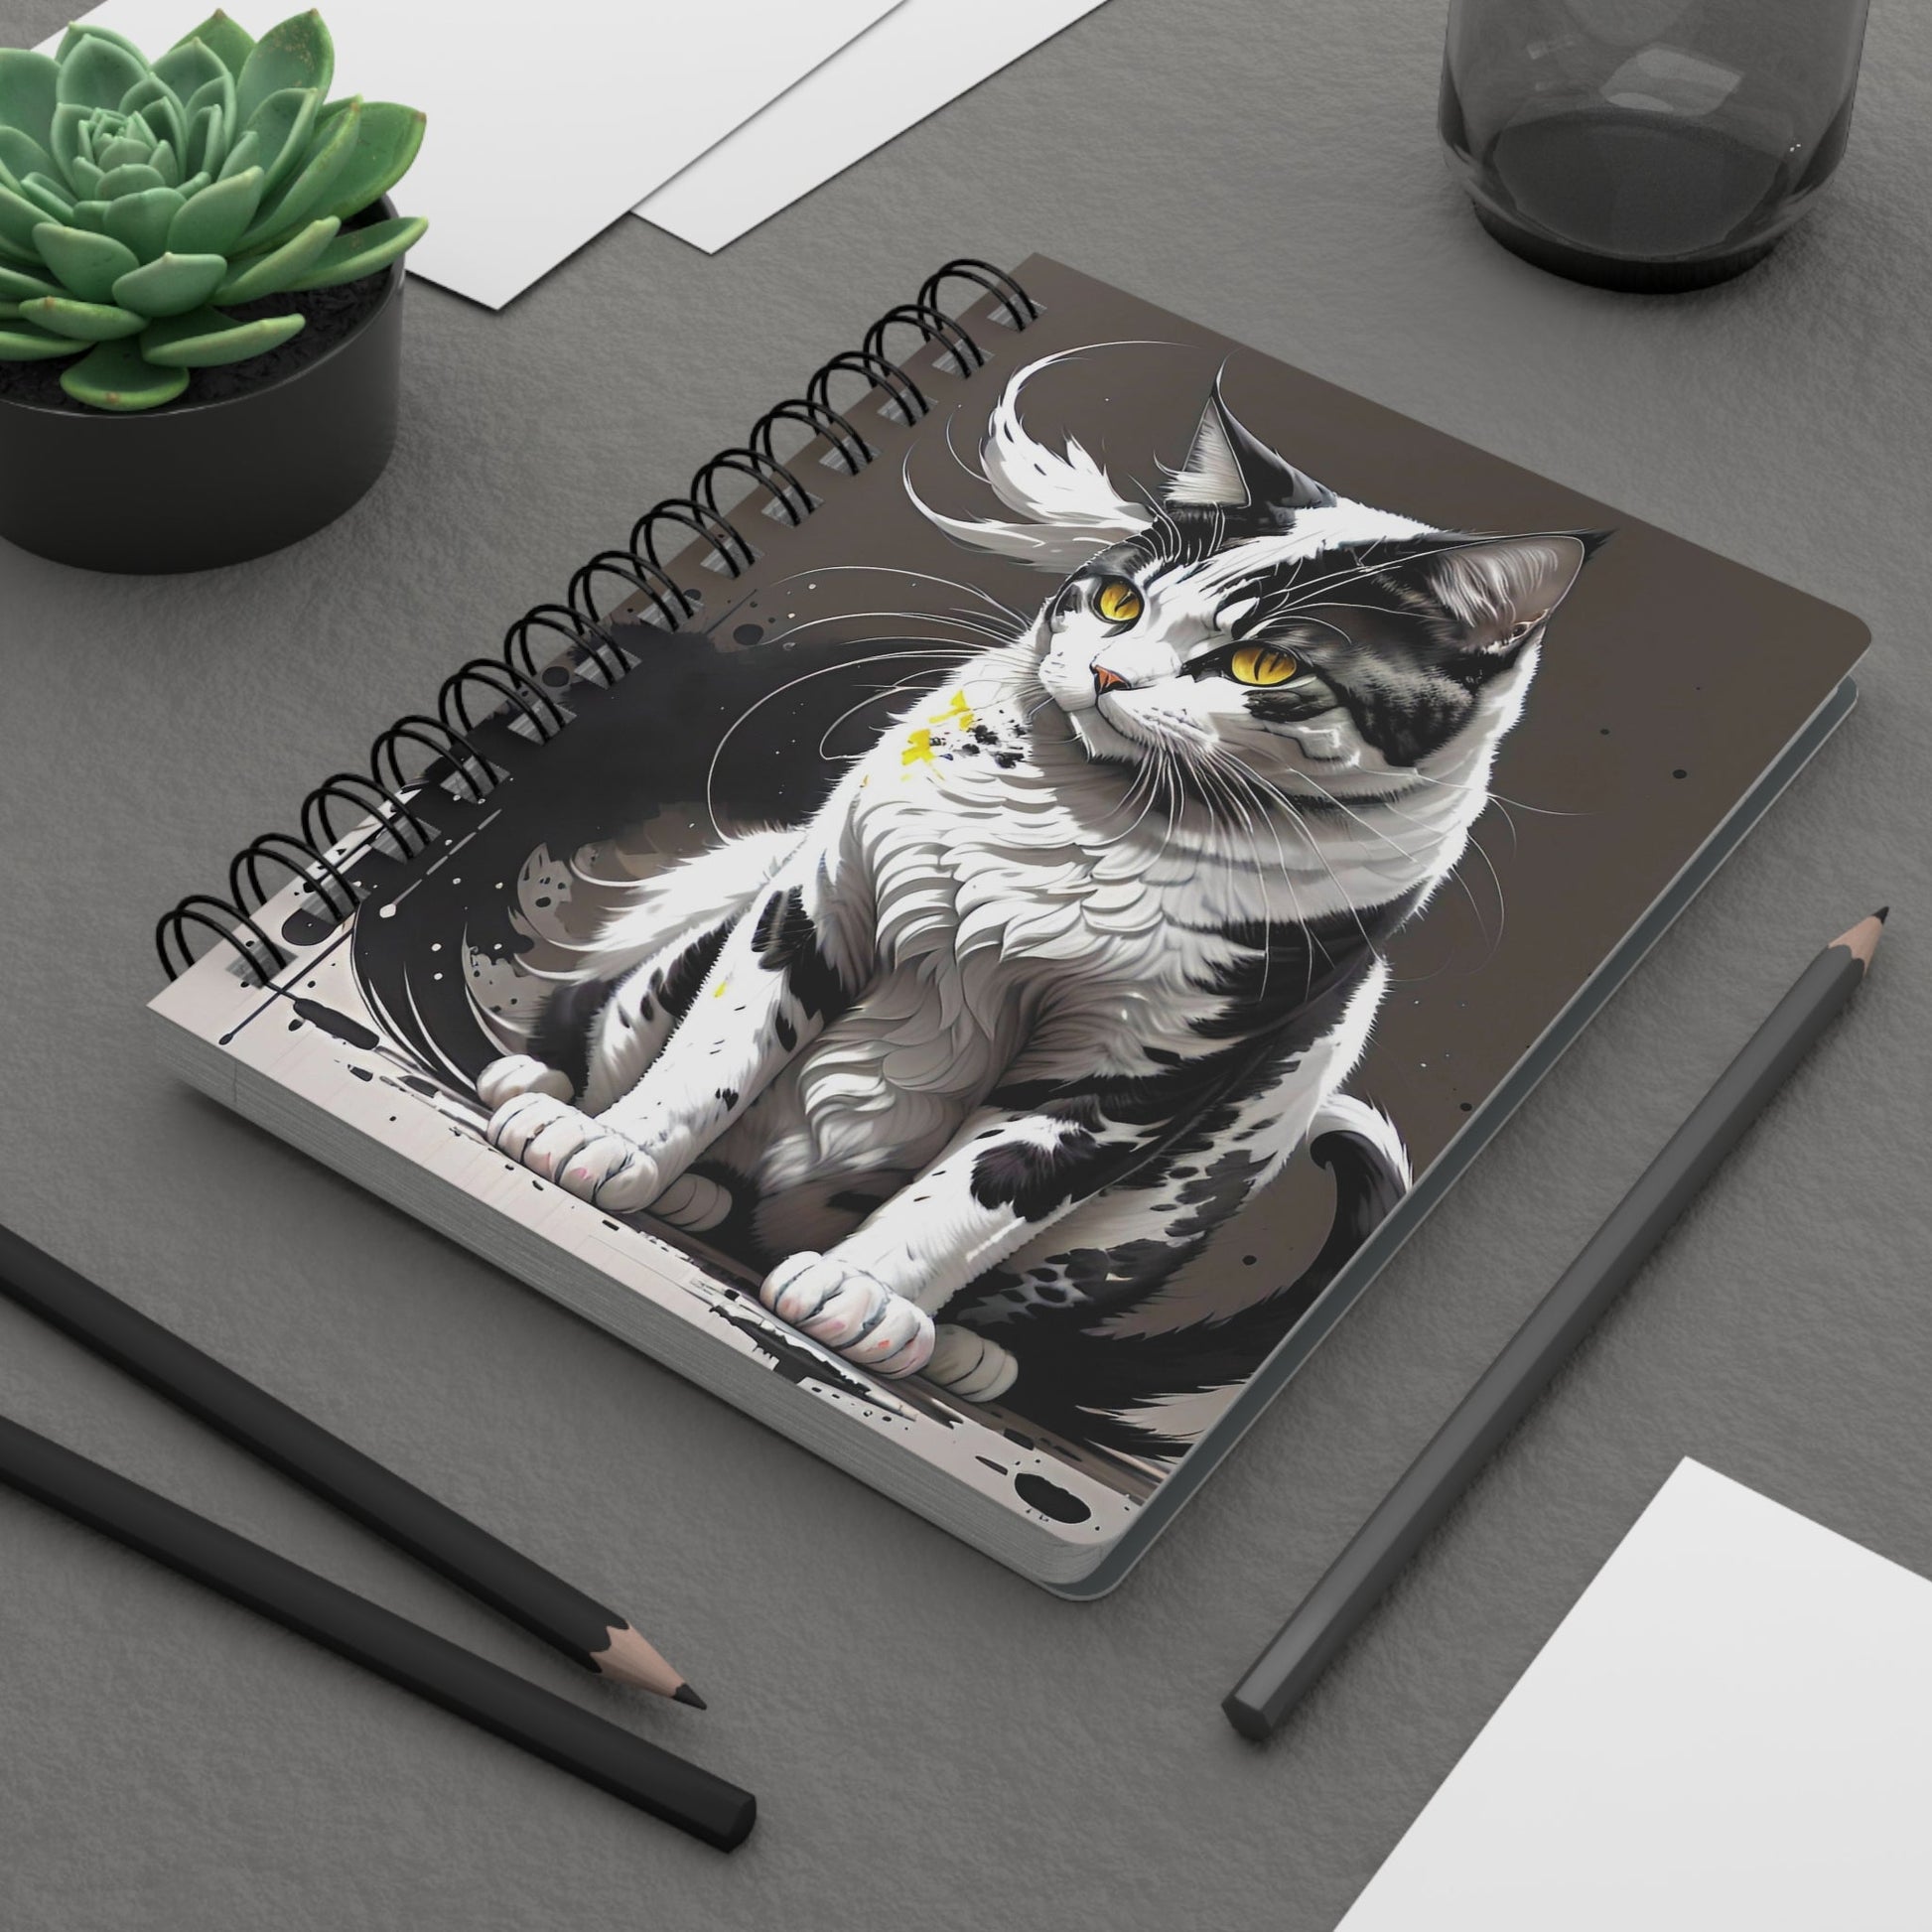 CrazyYetiClothing, CYC, Golden-Eyed Cat (Spiral Bound Journal), Paper products